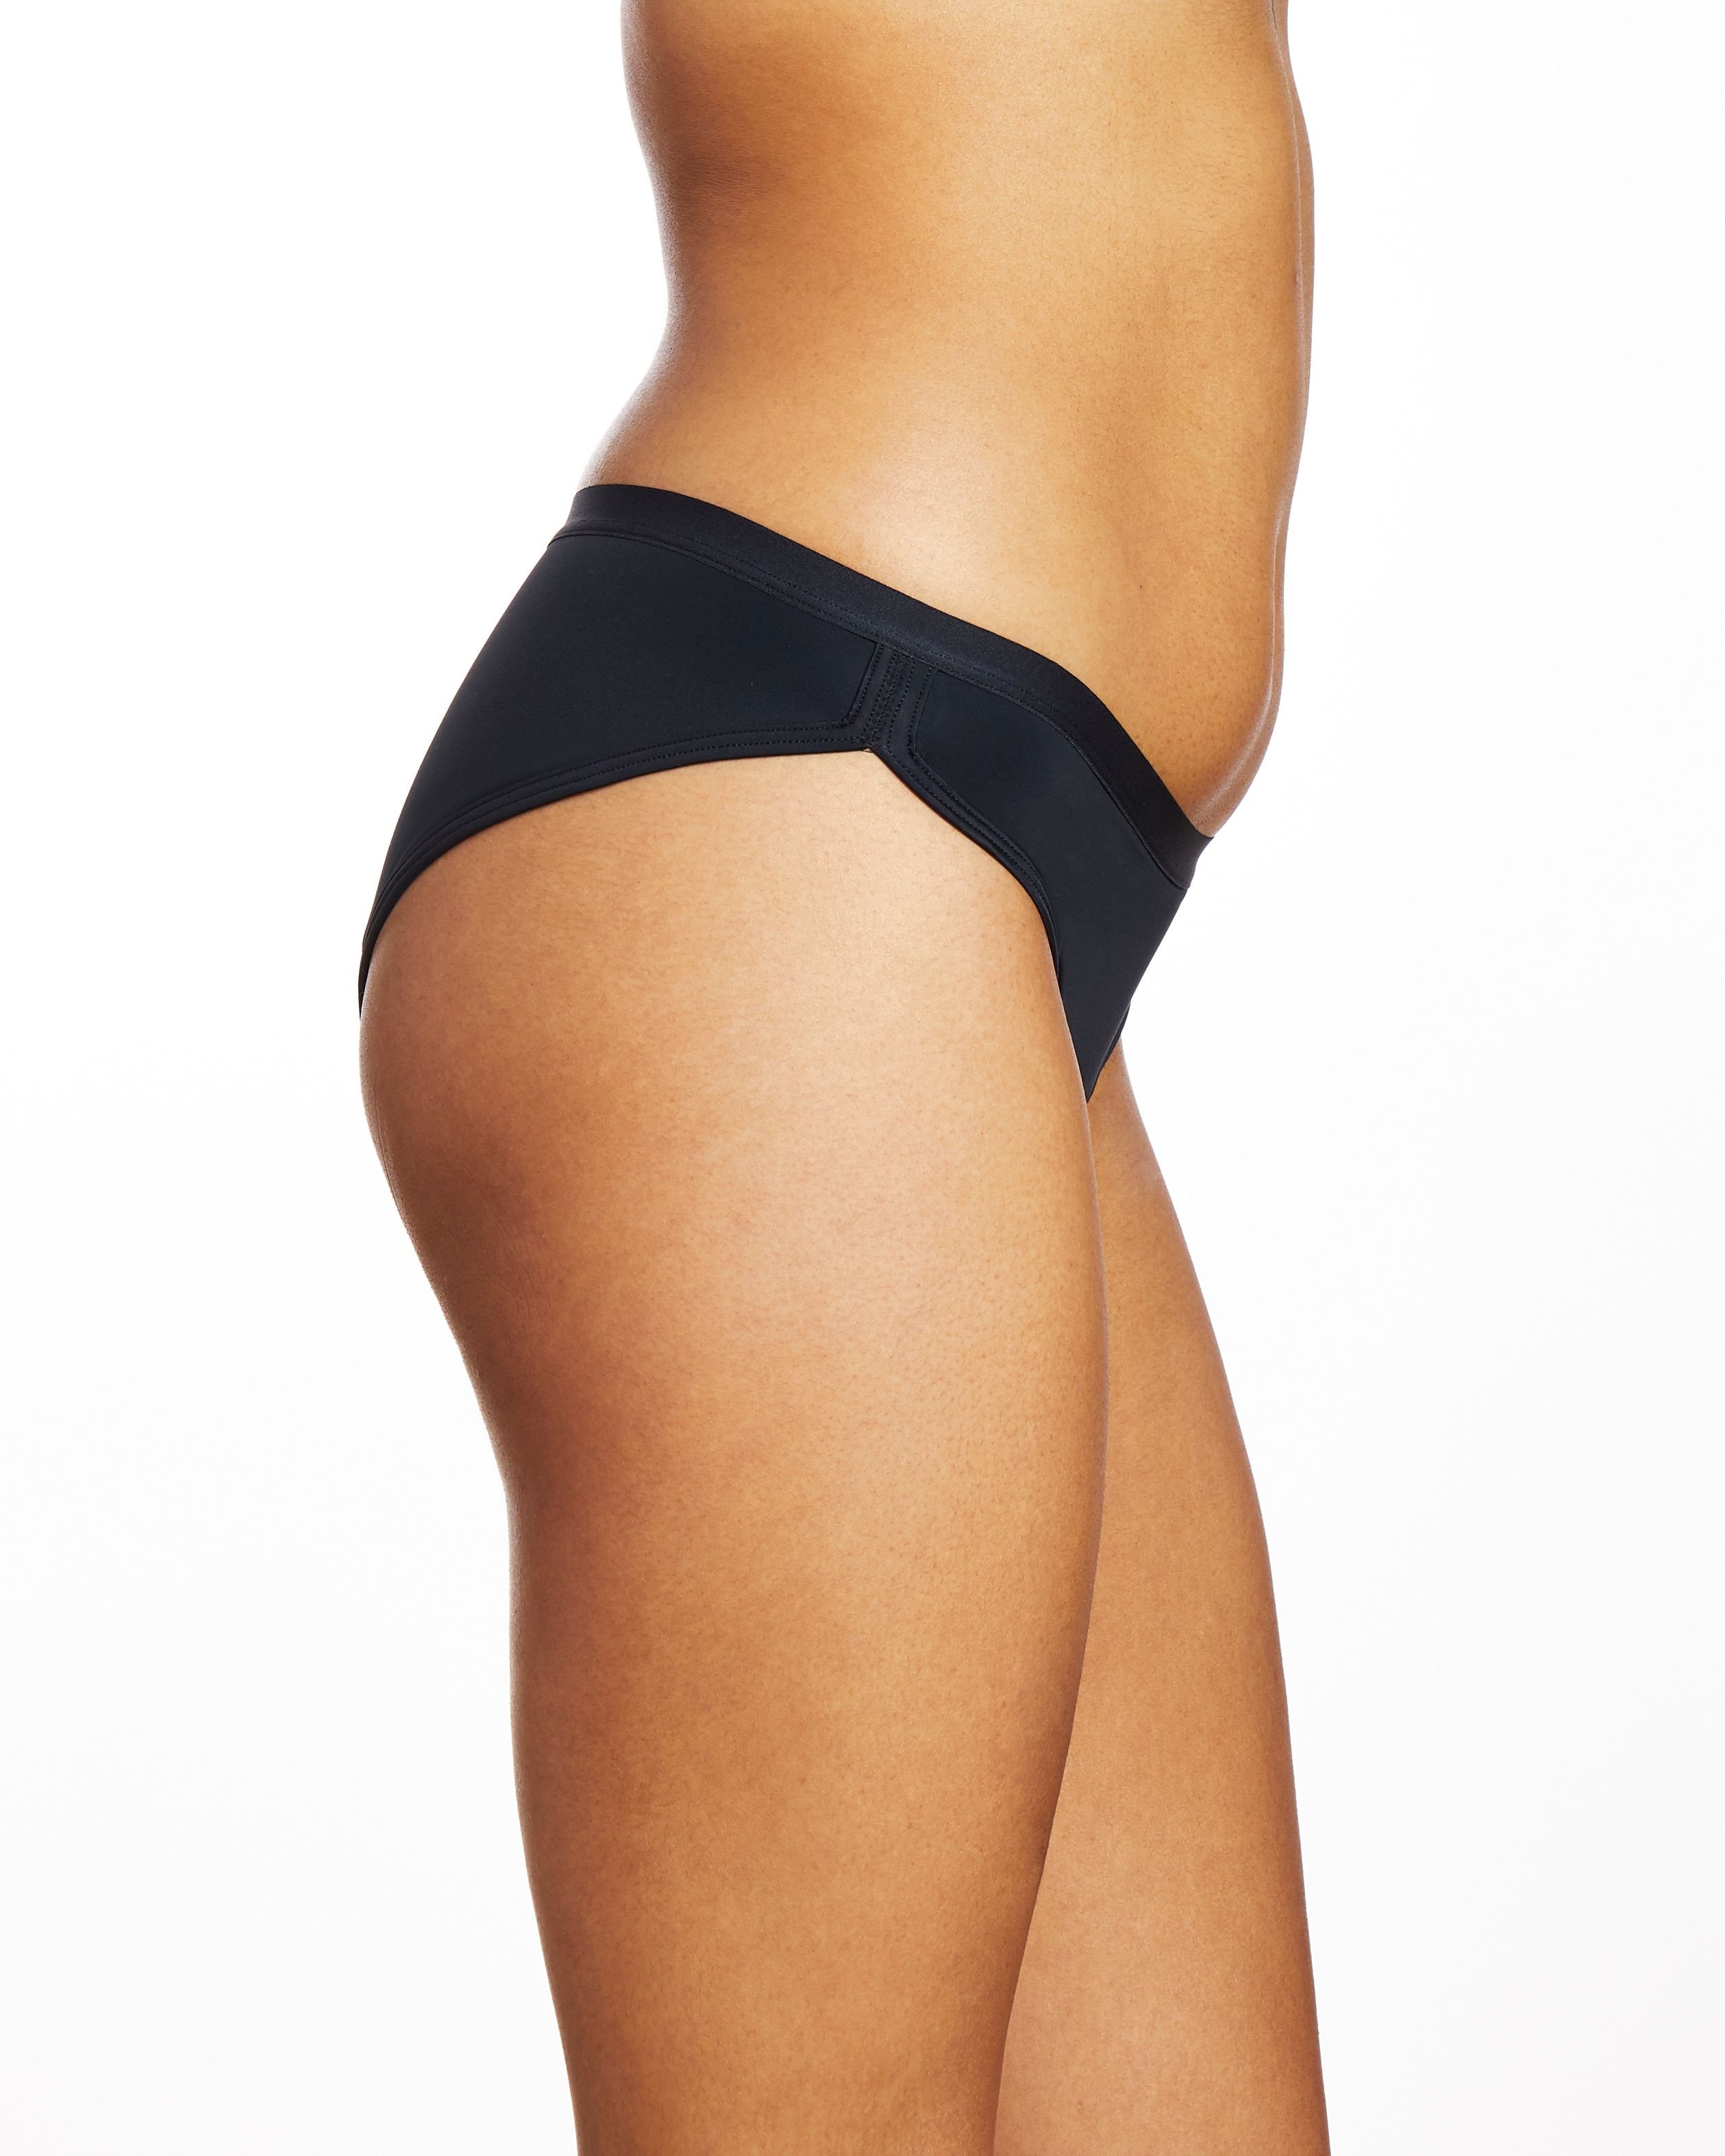 Thinx For All period proof hiphugger brief with moderate